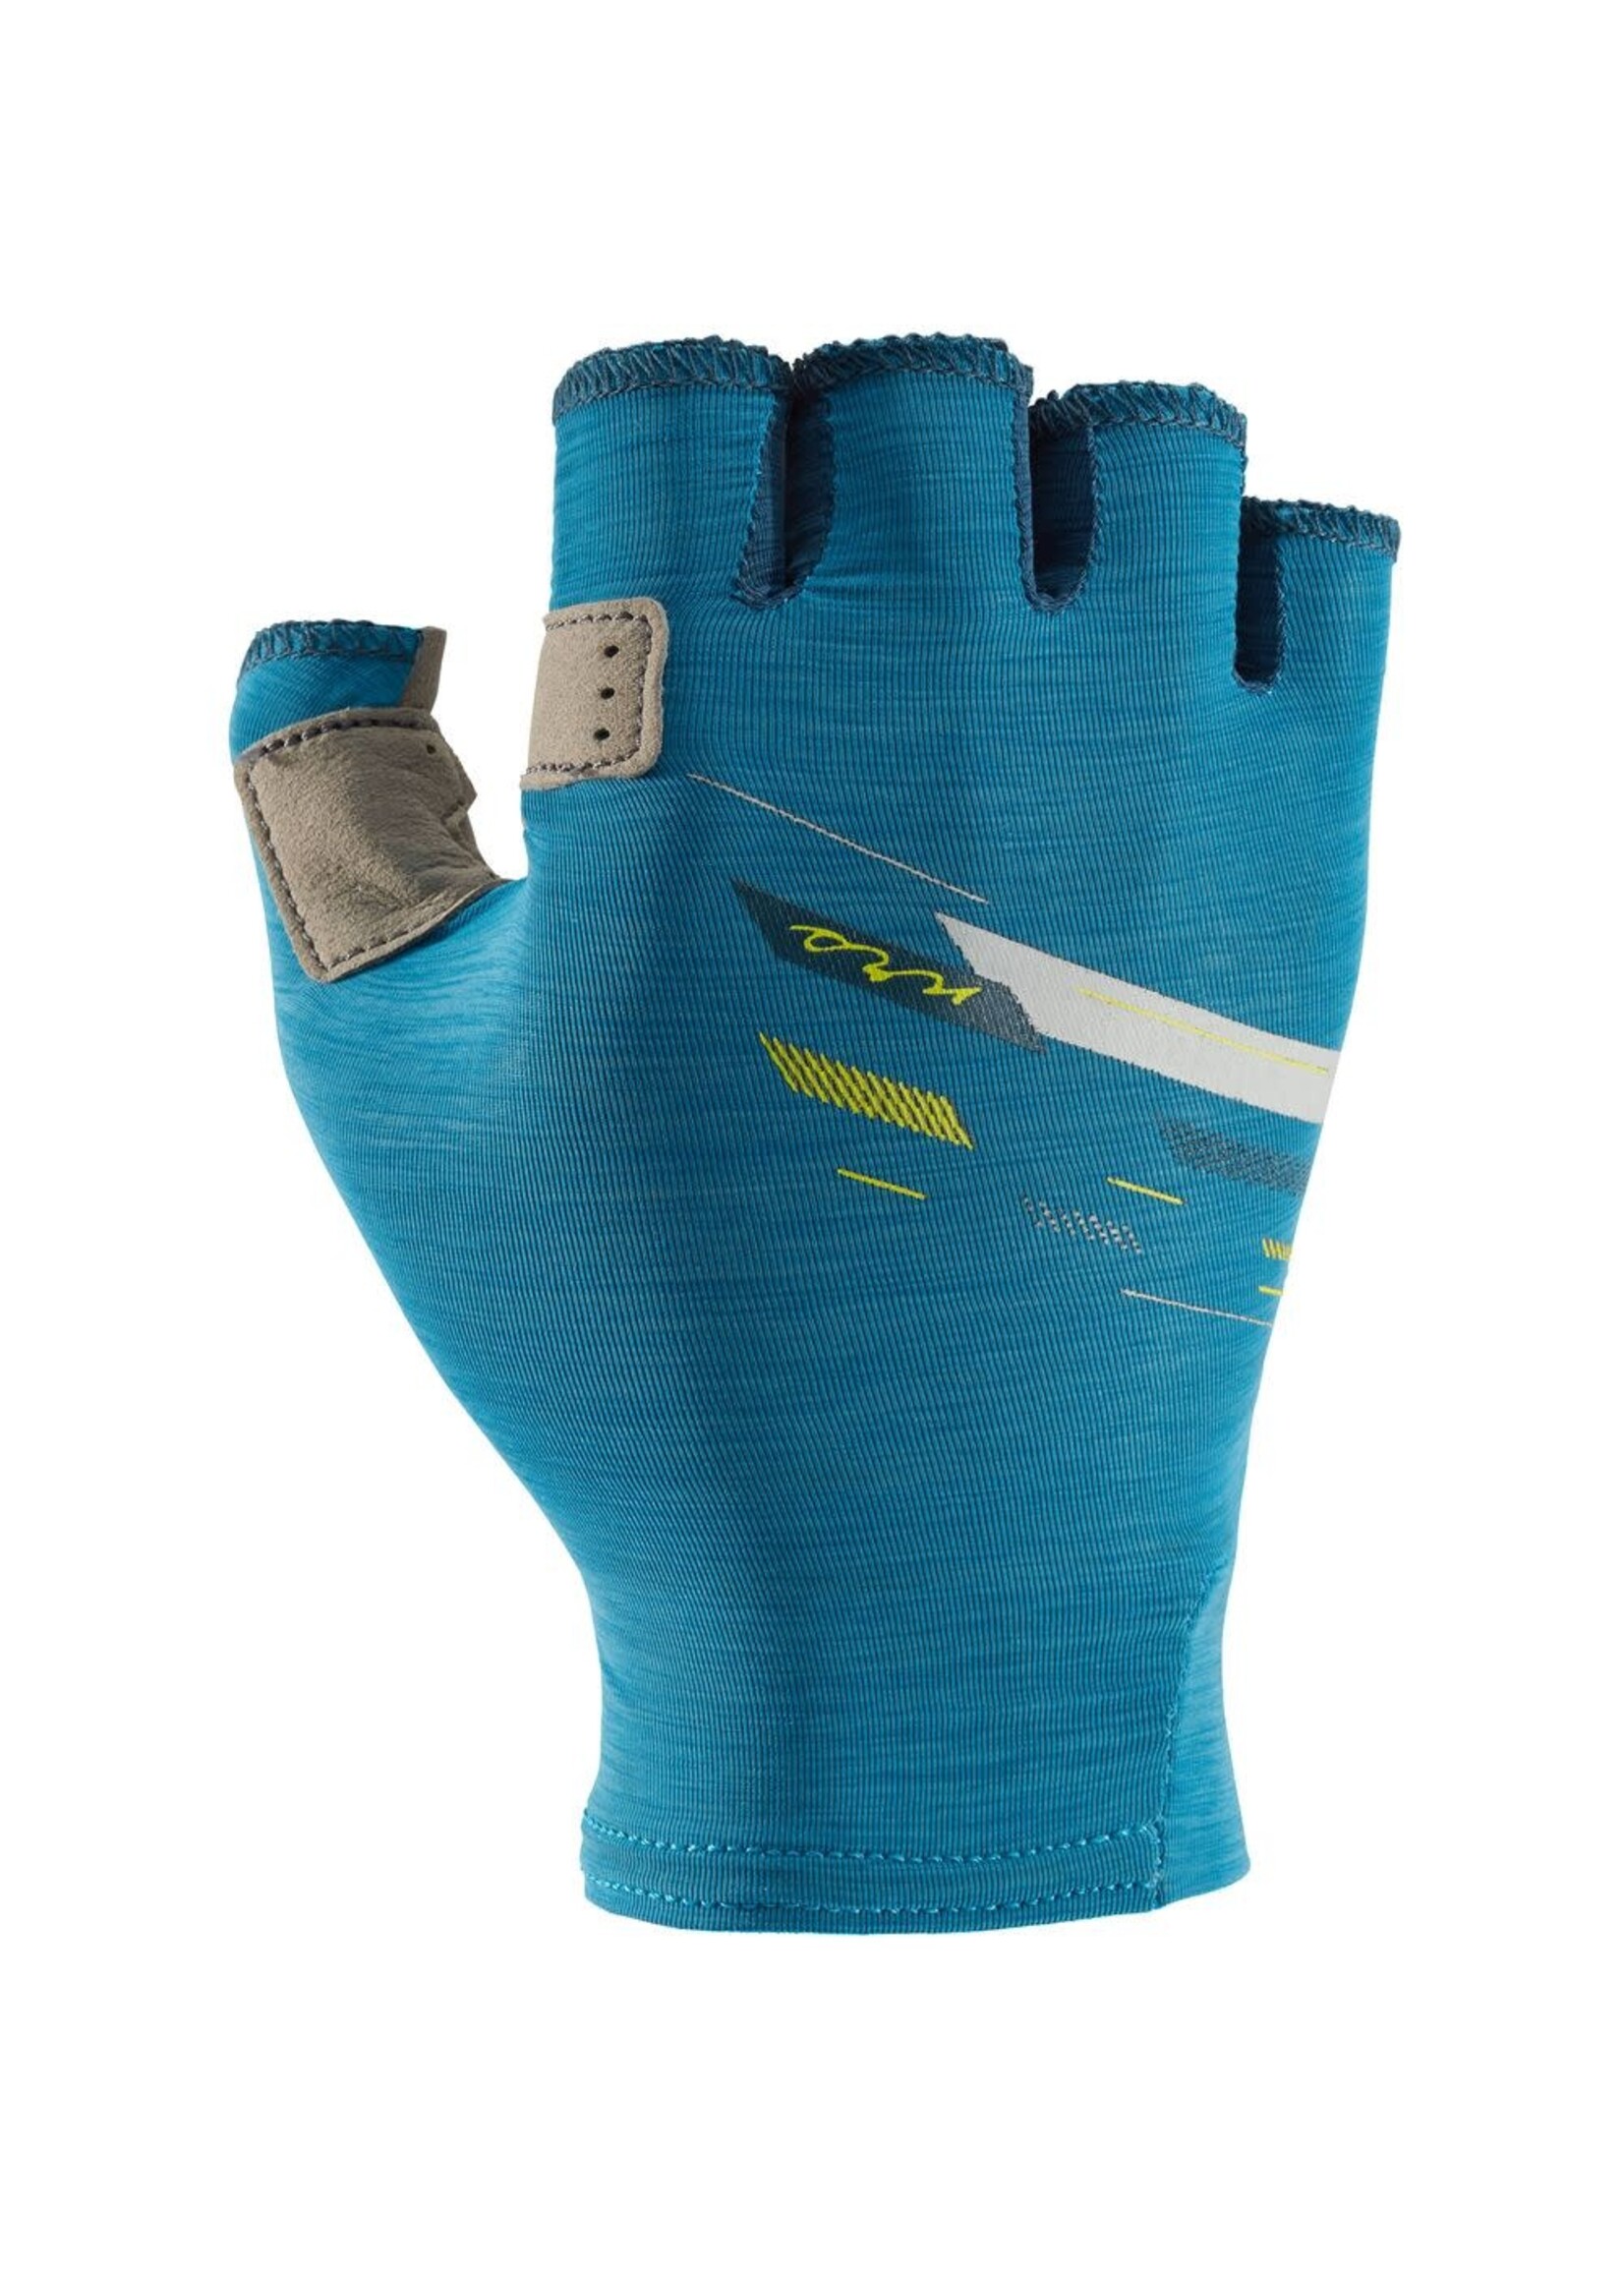 NRS NRS Womens Boater's Glove Fjord- S